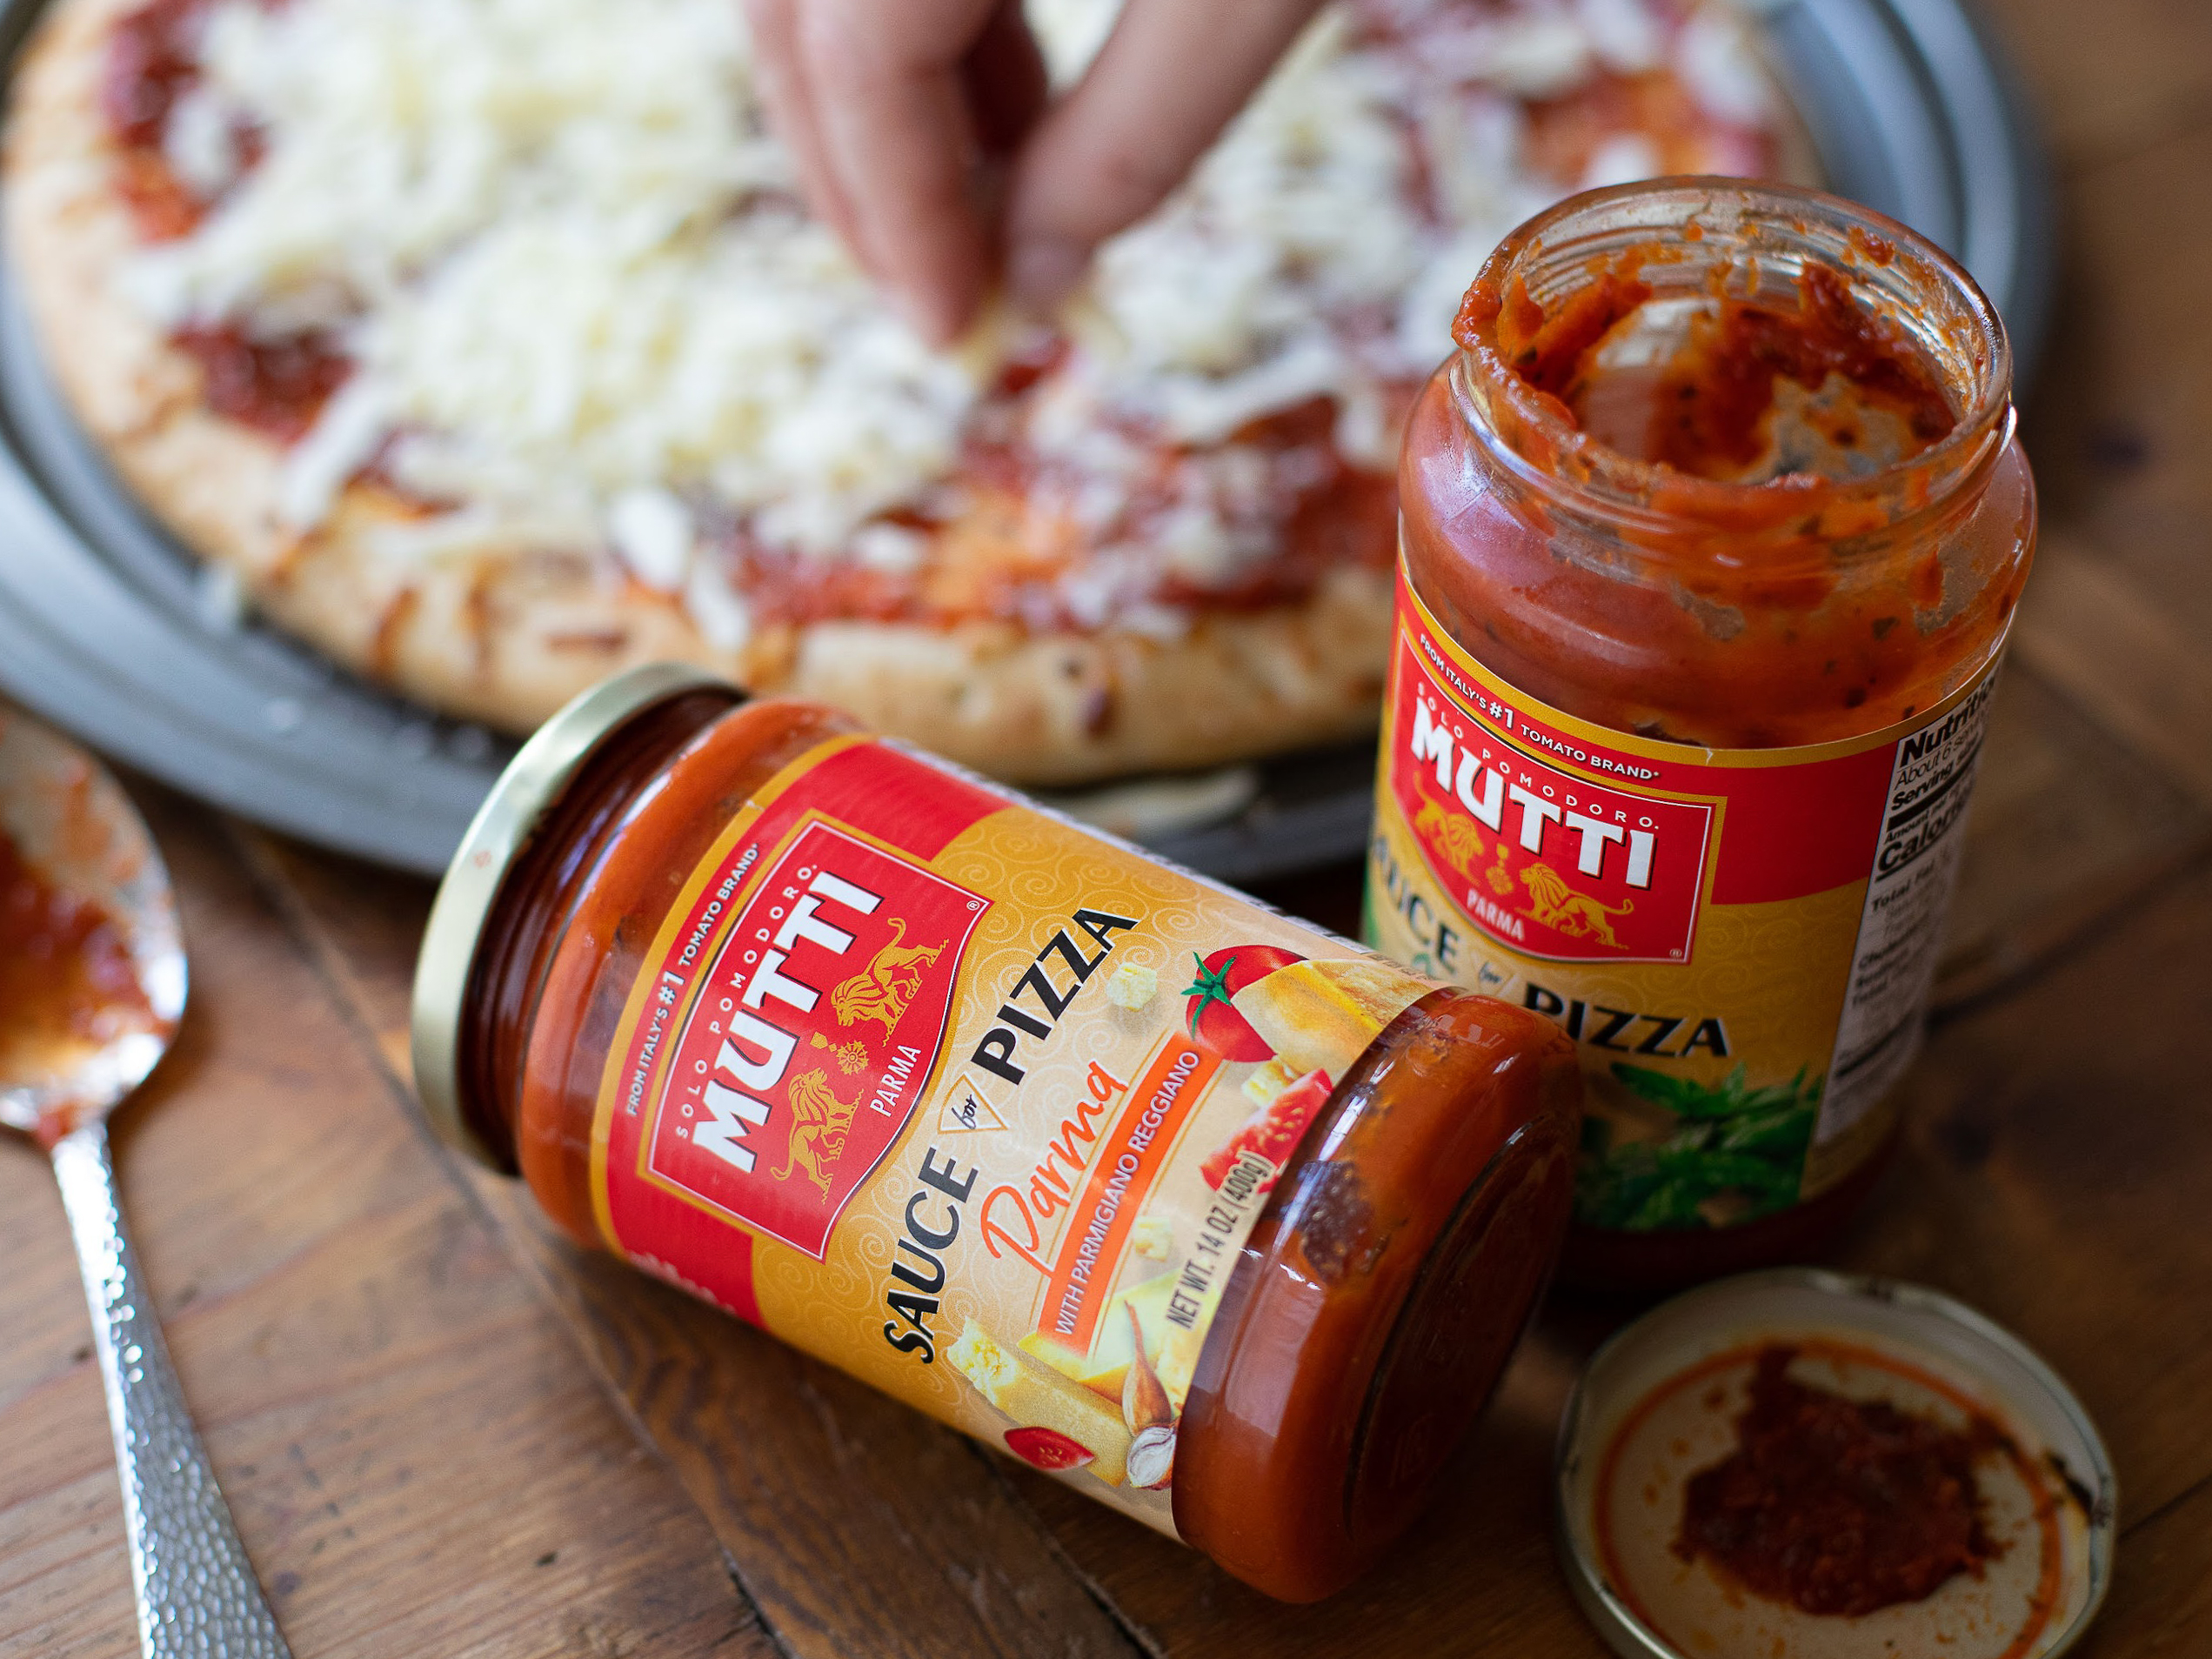 Mutti® Sauces for Pizza Is Your Delicious Start To The Perfect Homemade Pizza - On Sale NOW At Publix on I Heart Publix